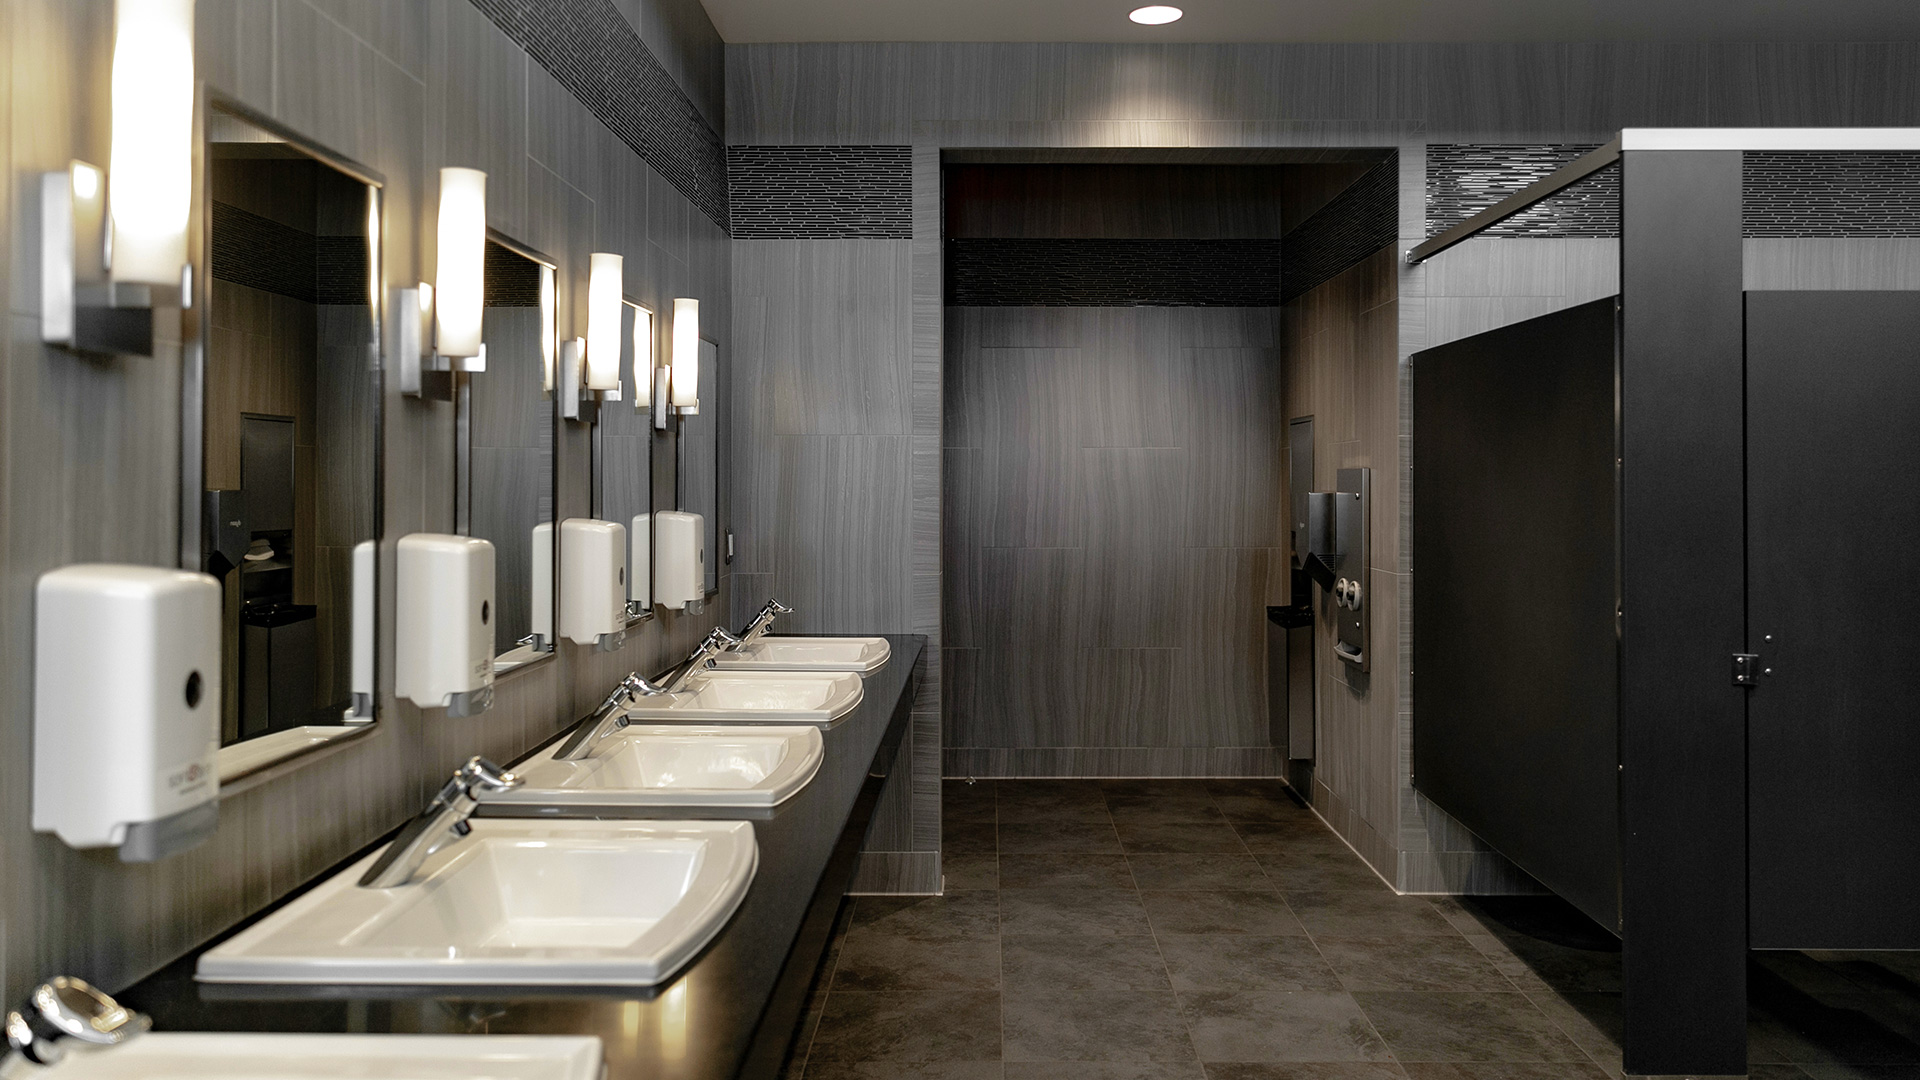 Bathroom, with textured panel gray walls and black trim, looking at entrance with hand dryers.